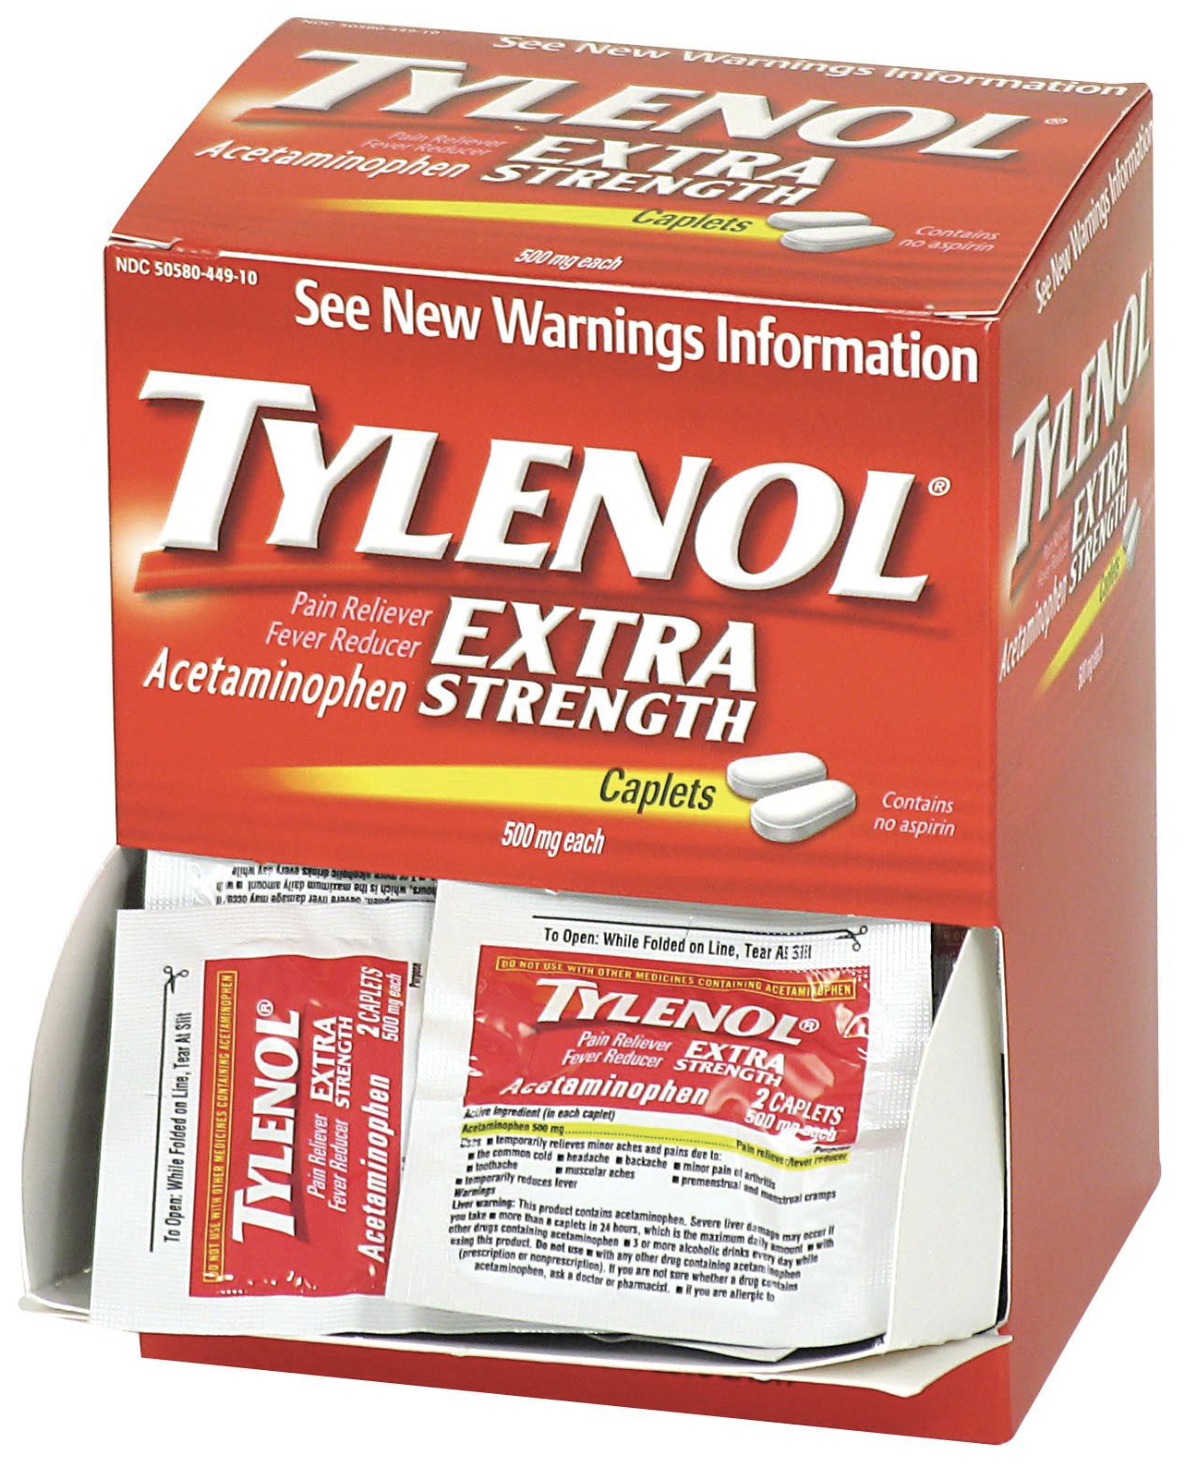 “Scientists don't fully know how acetaminophen (aka Tylenol) actually works.”